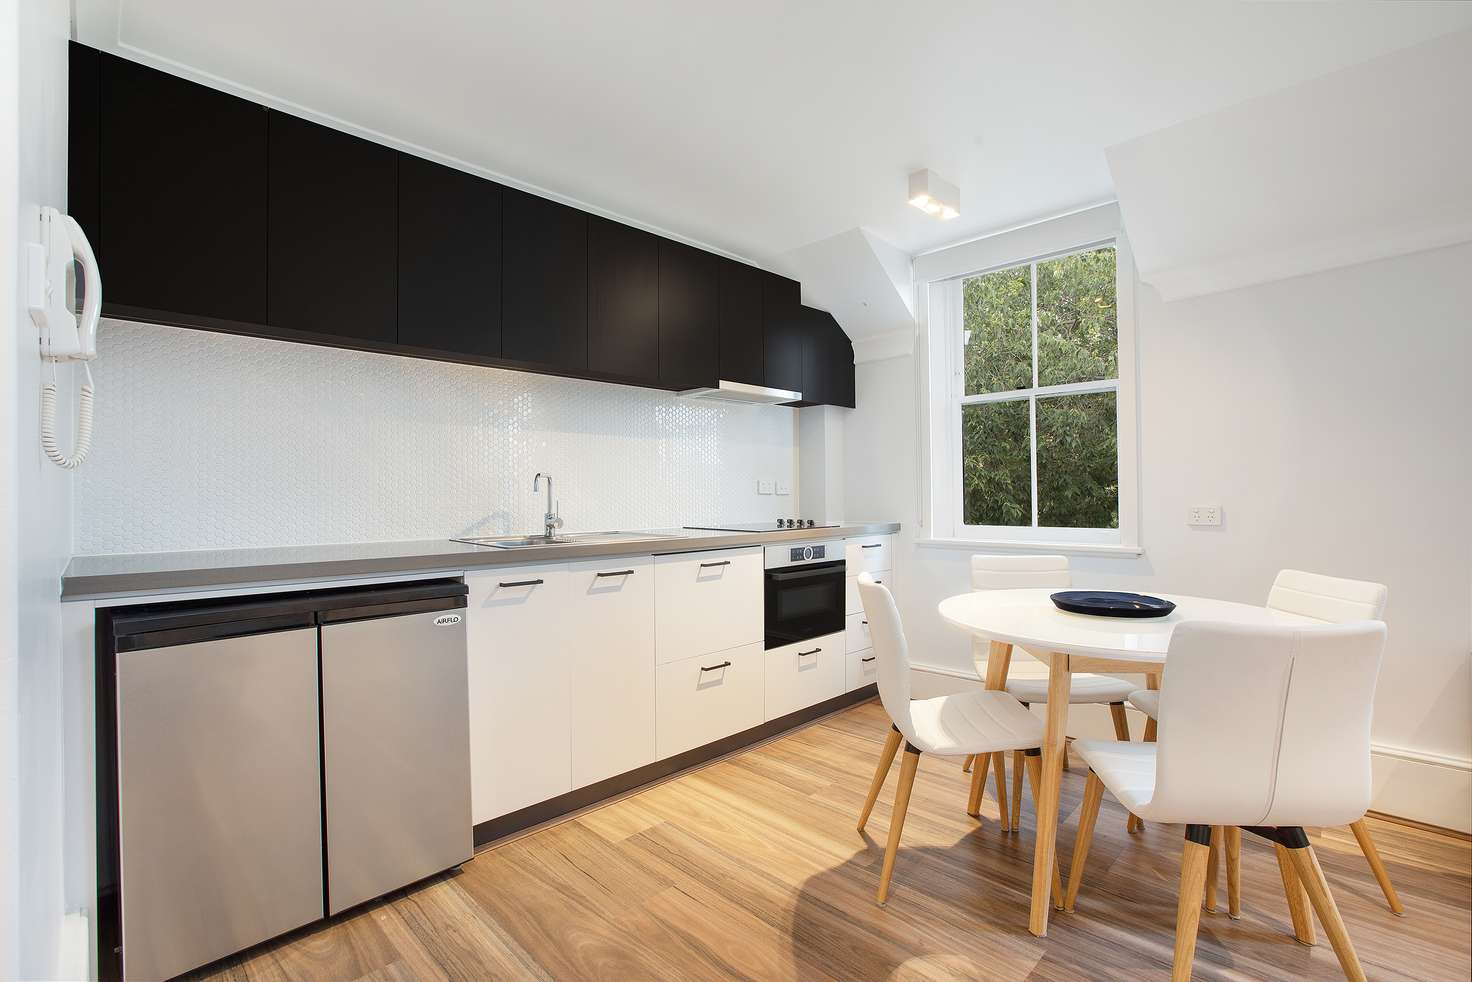 Main view of Homely apartment listing, 7/26-28 Lower Fort Street, Millers Point NSW 2000